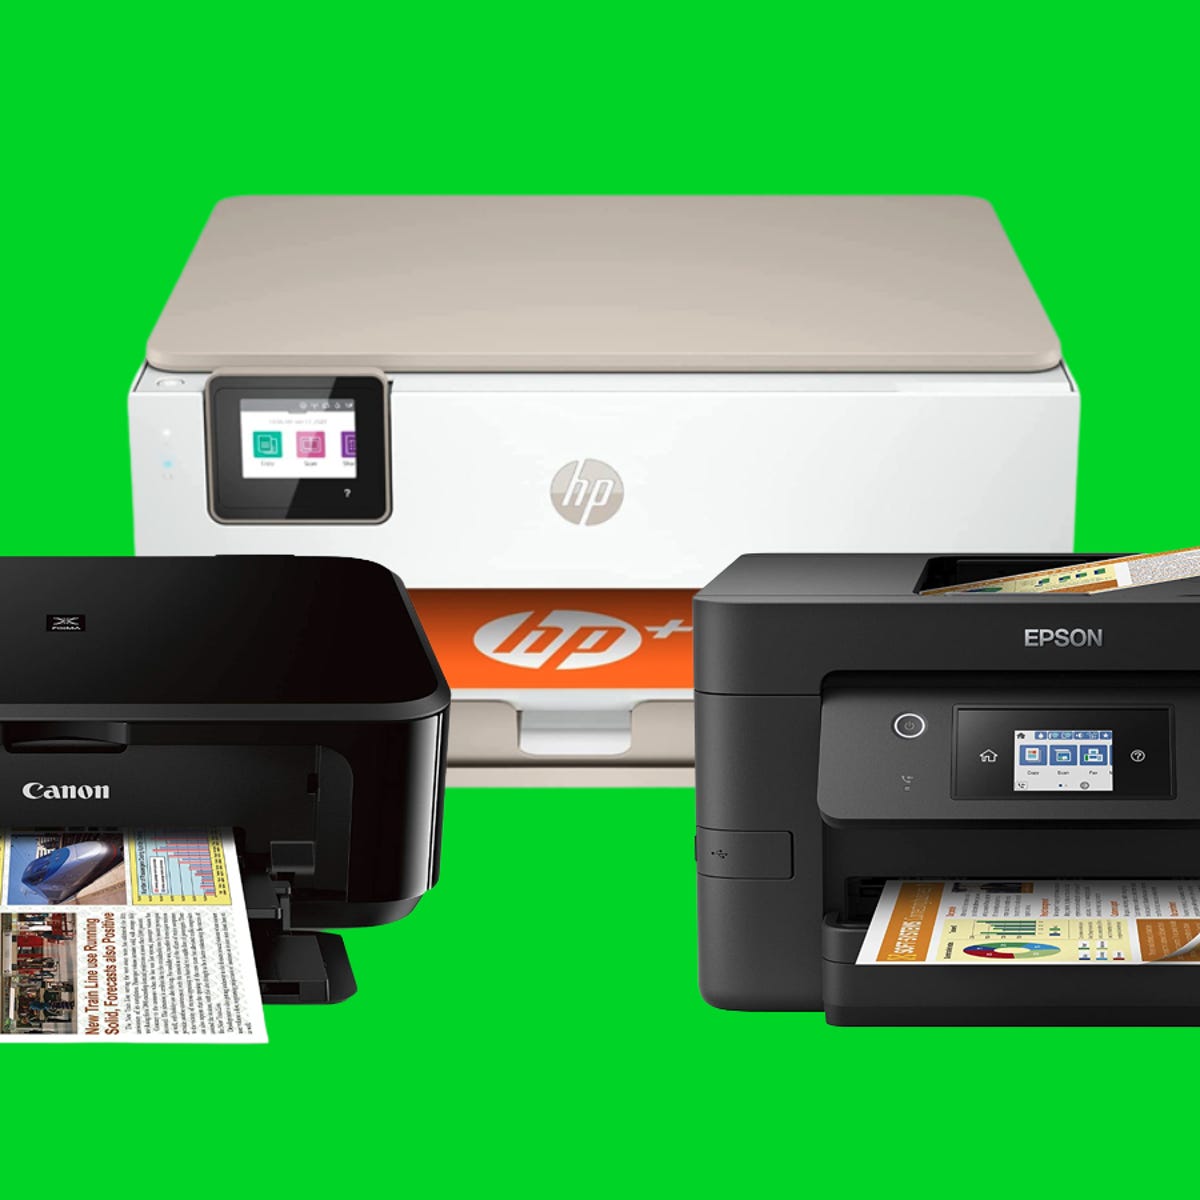 ukuelige lager Asien Best Printer Deals: Prices Start at $70 for a Canon Pixma MG3620 - CNET